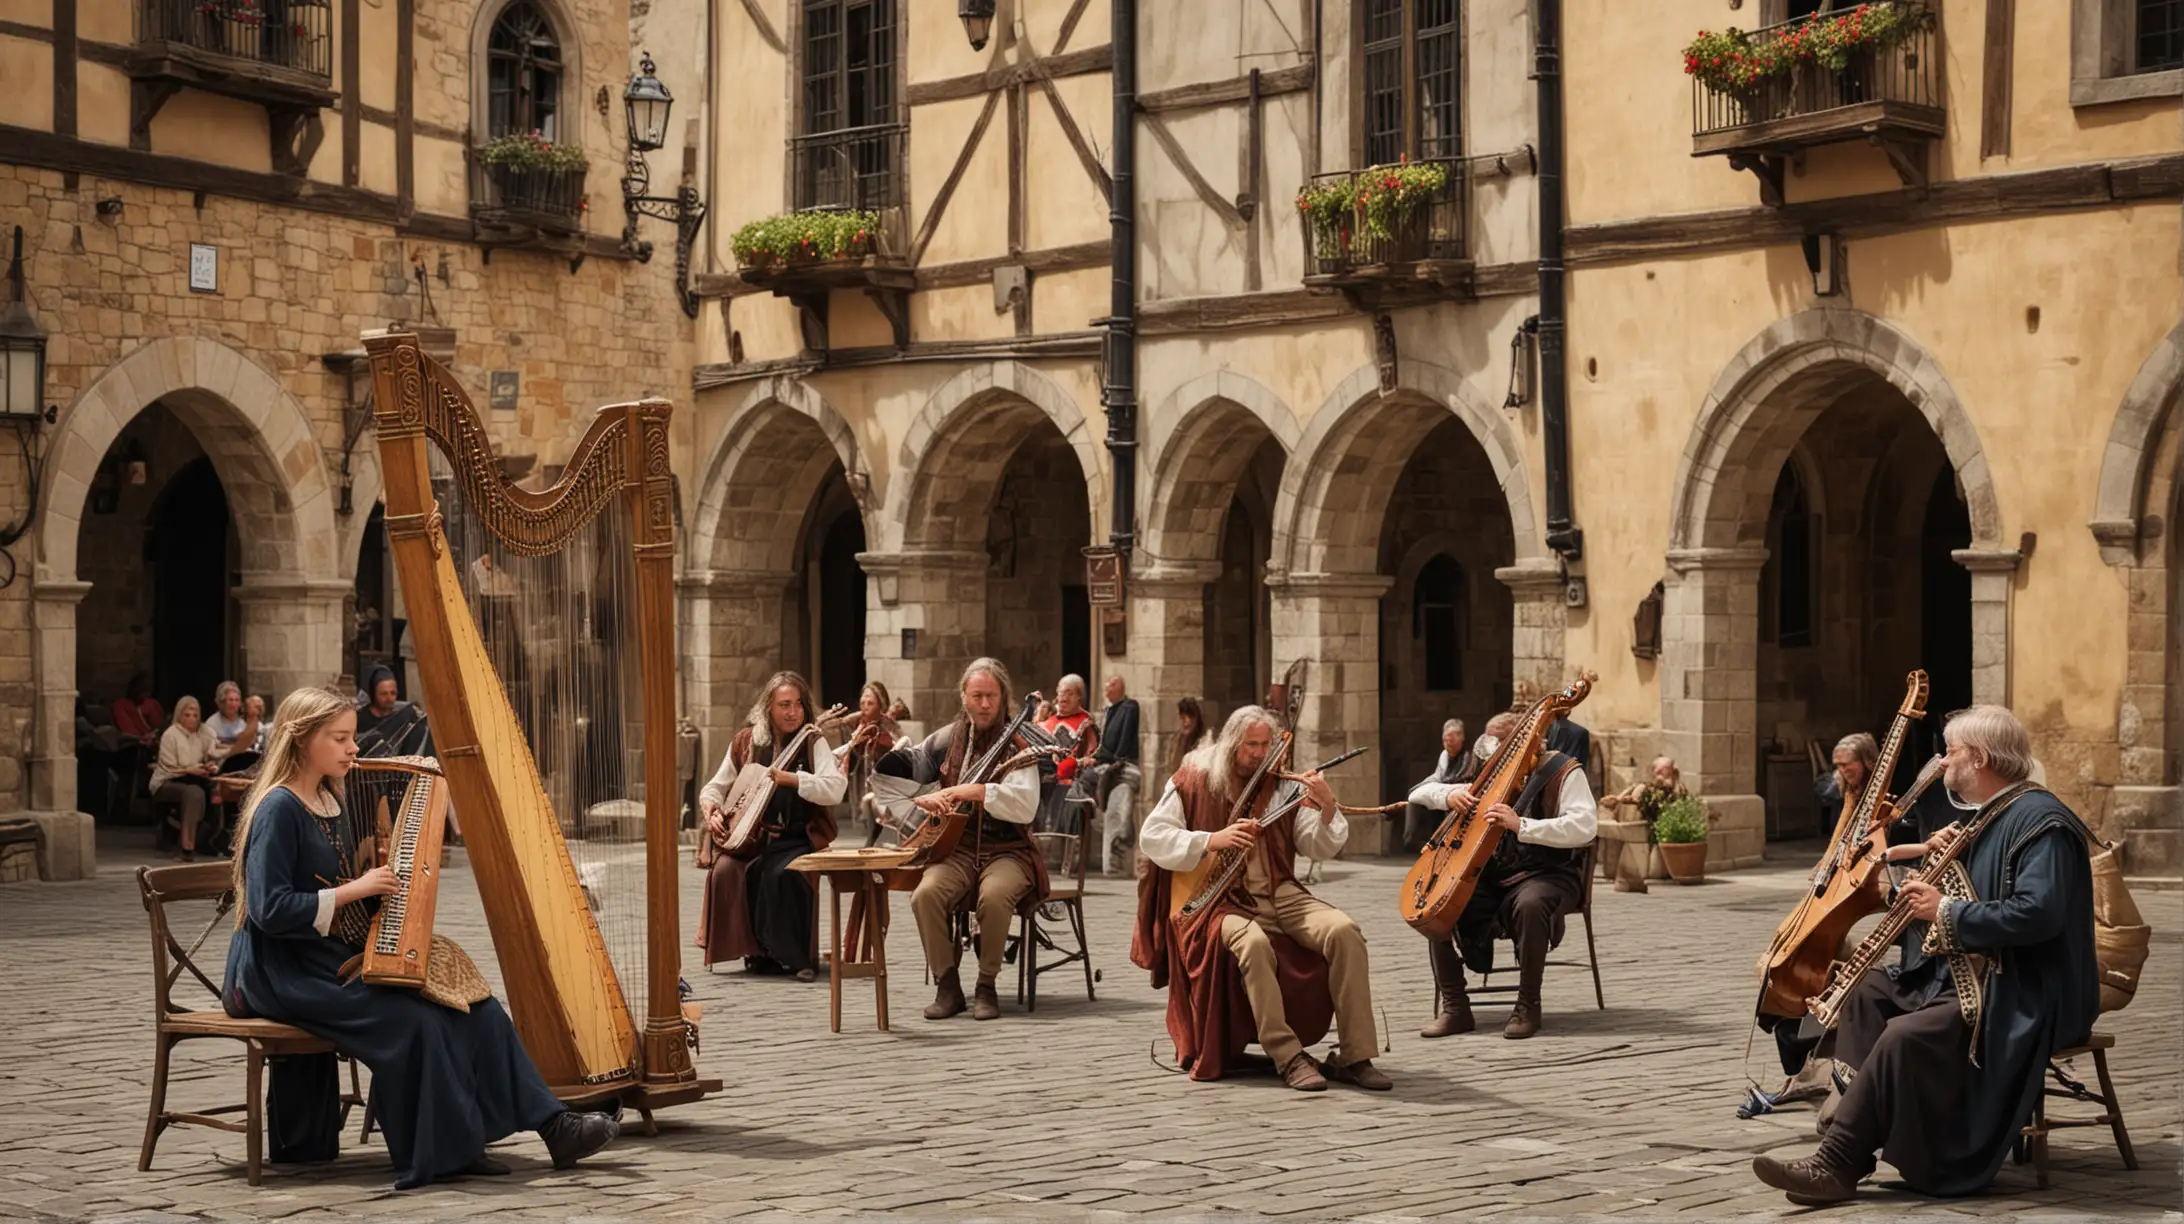 Some musicians playing the harp and flute in a medieval town square.